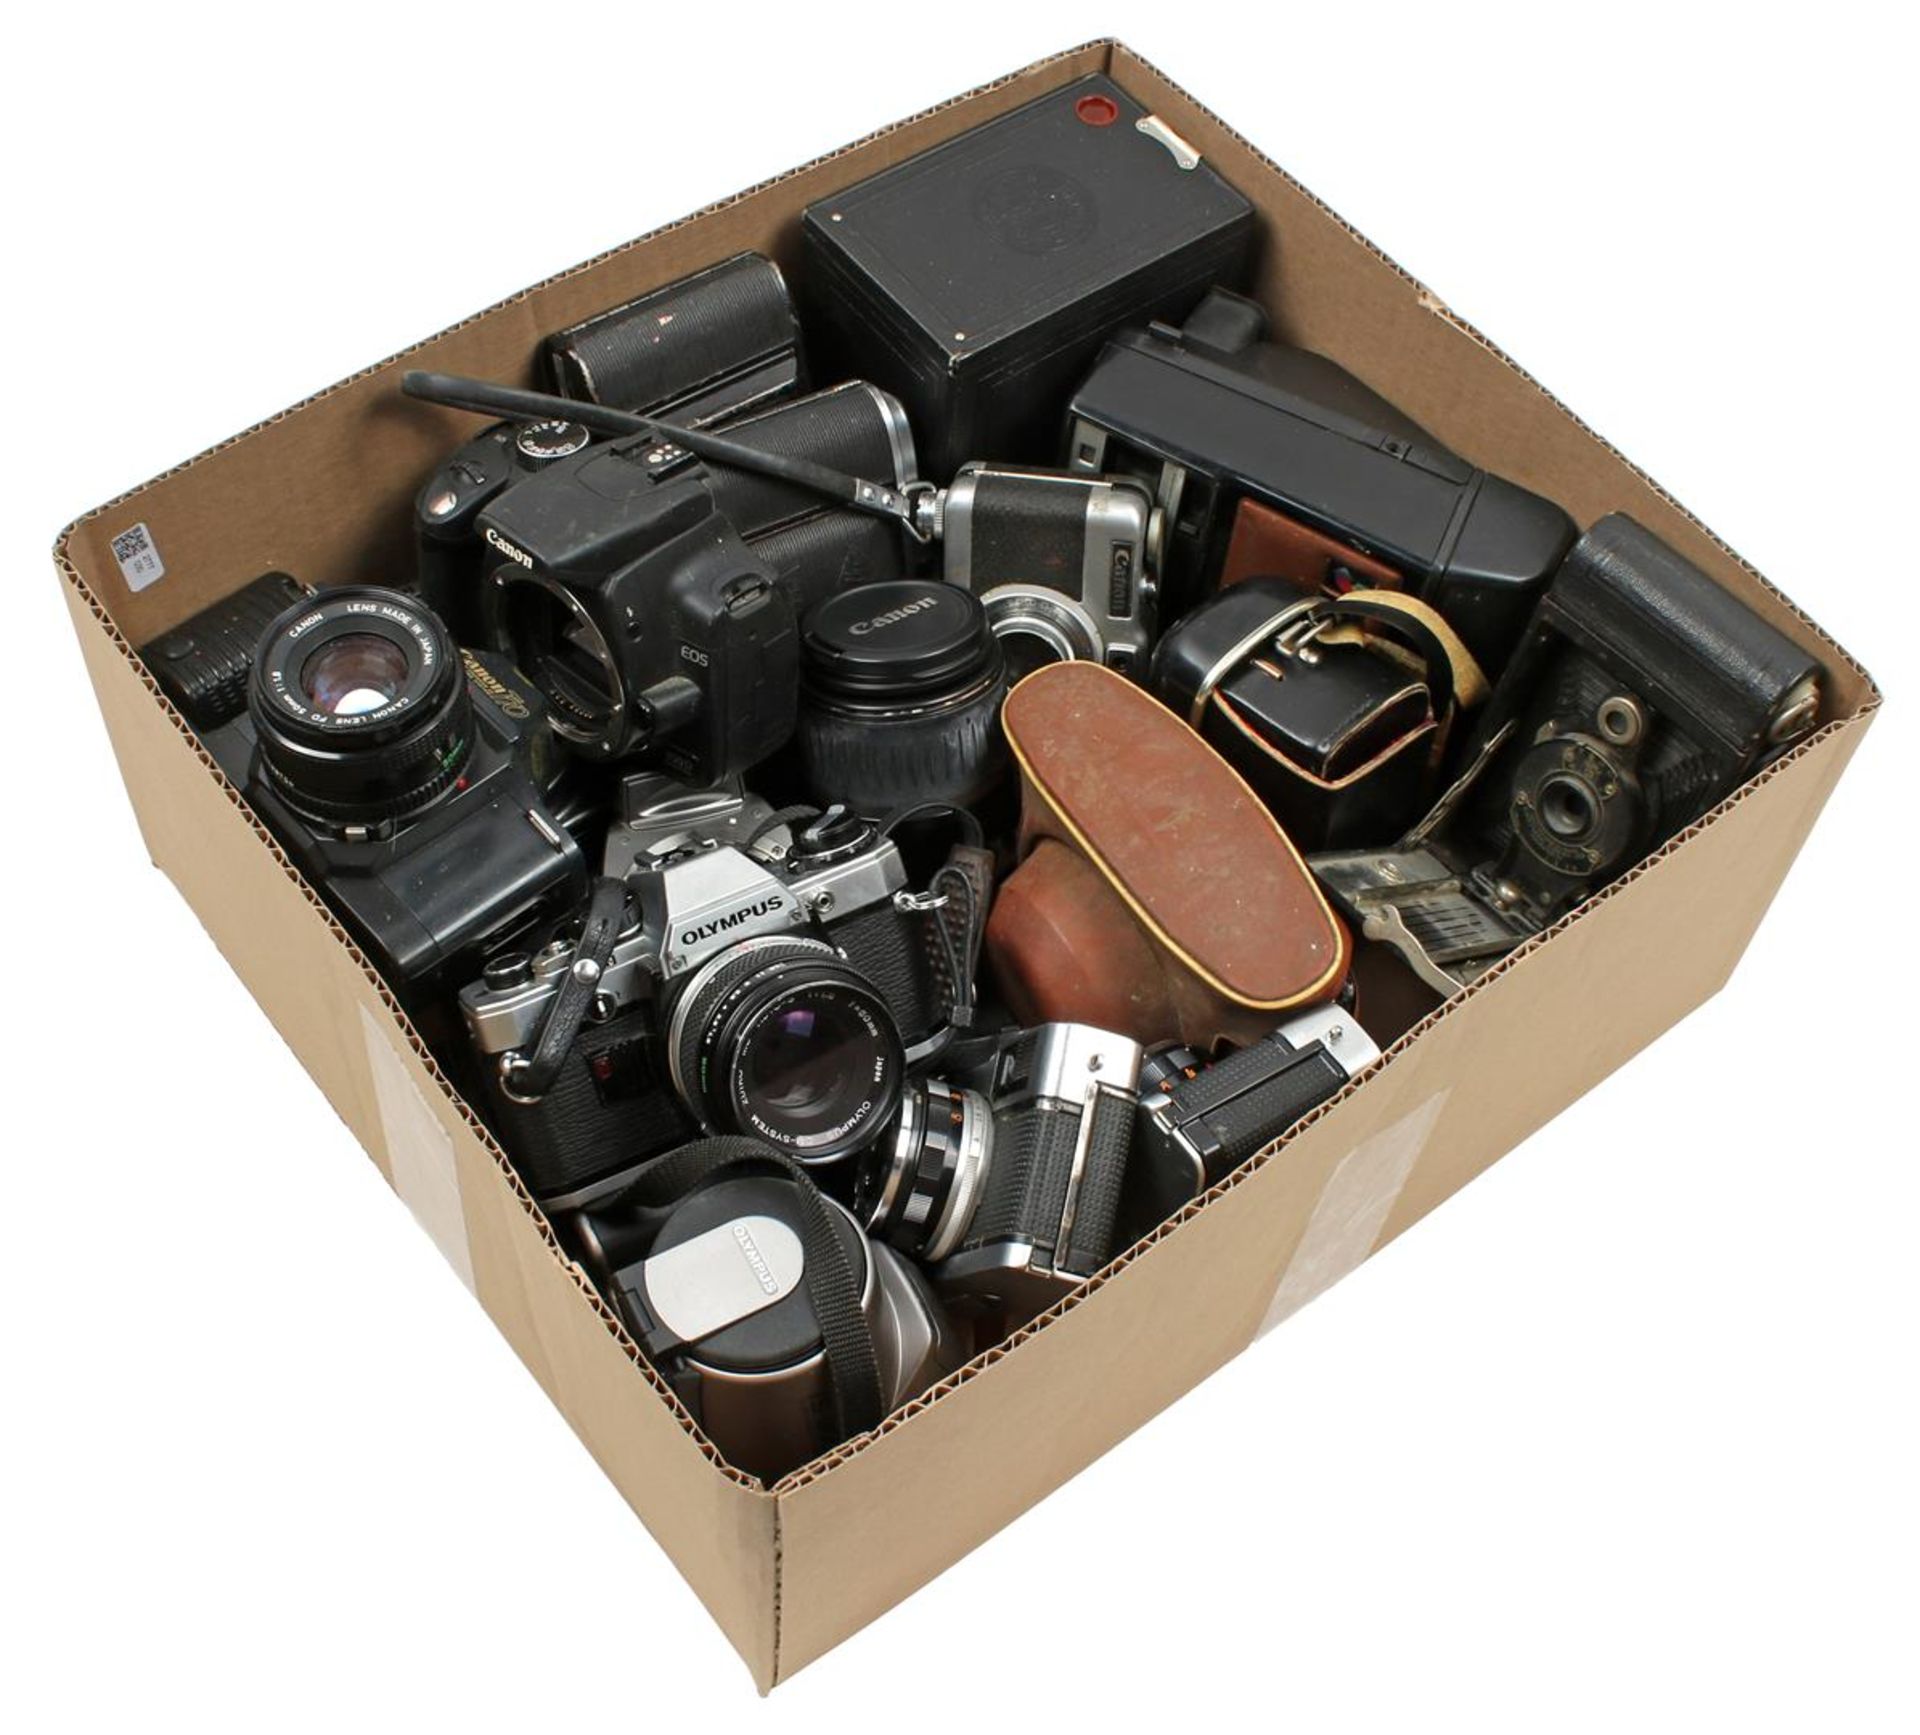 Box with cameras including Kodak, Canon and Olympus